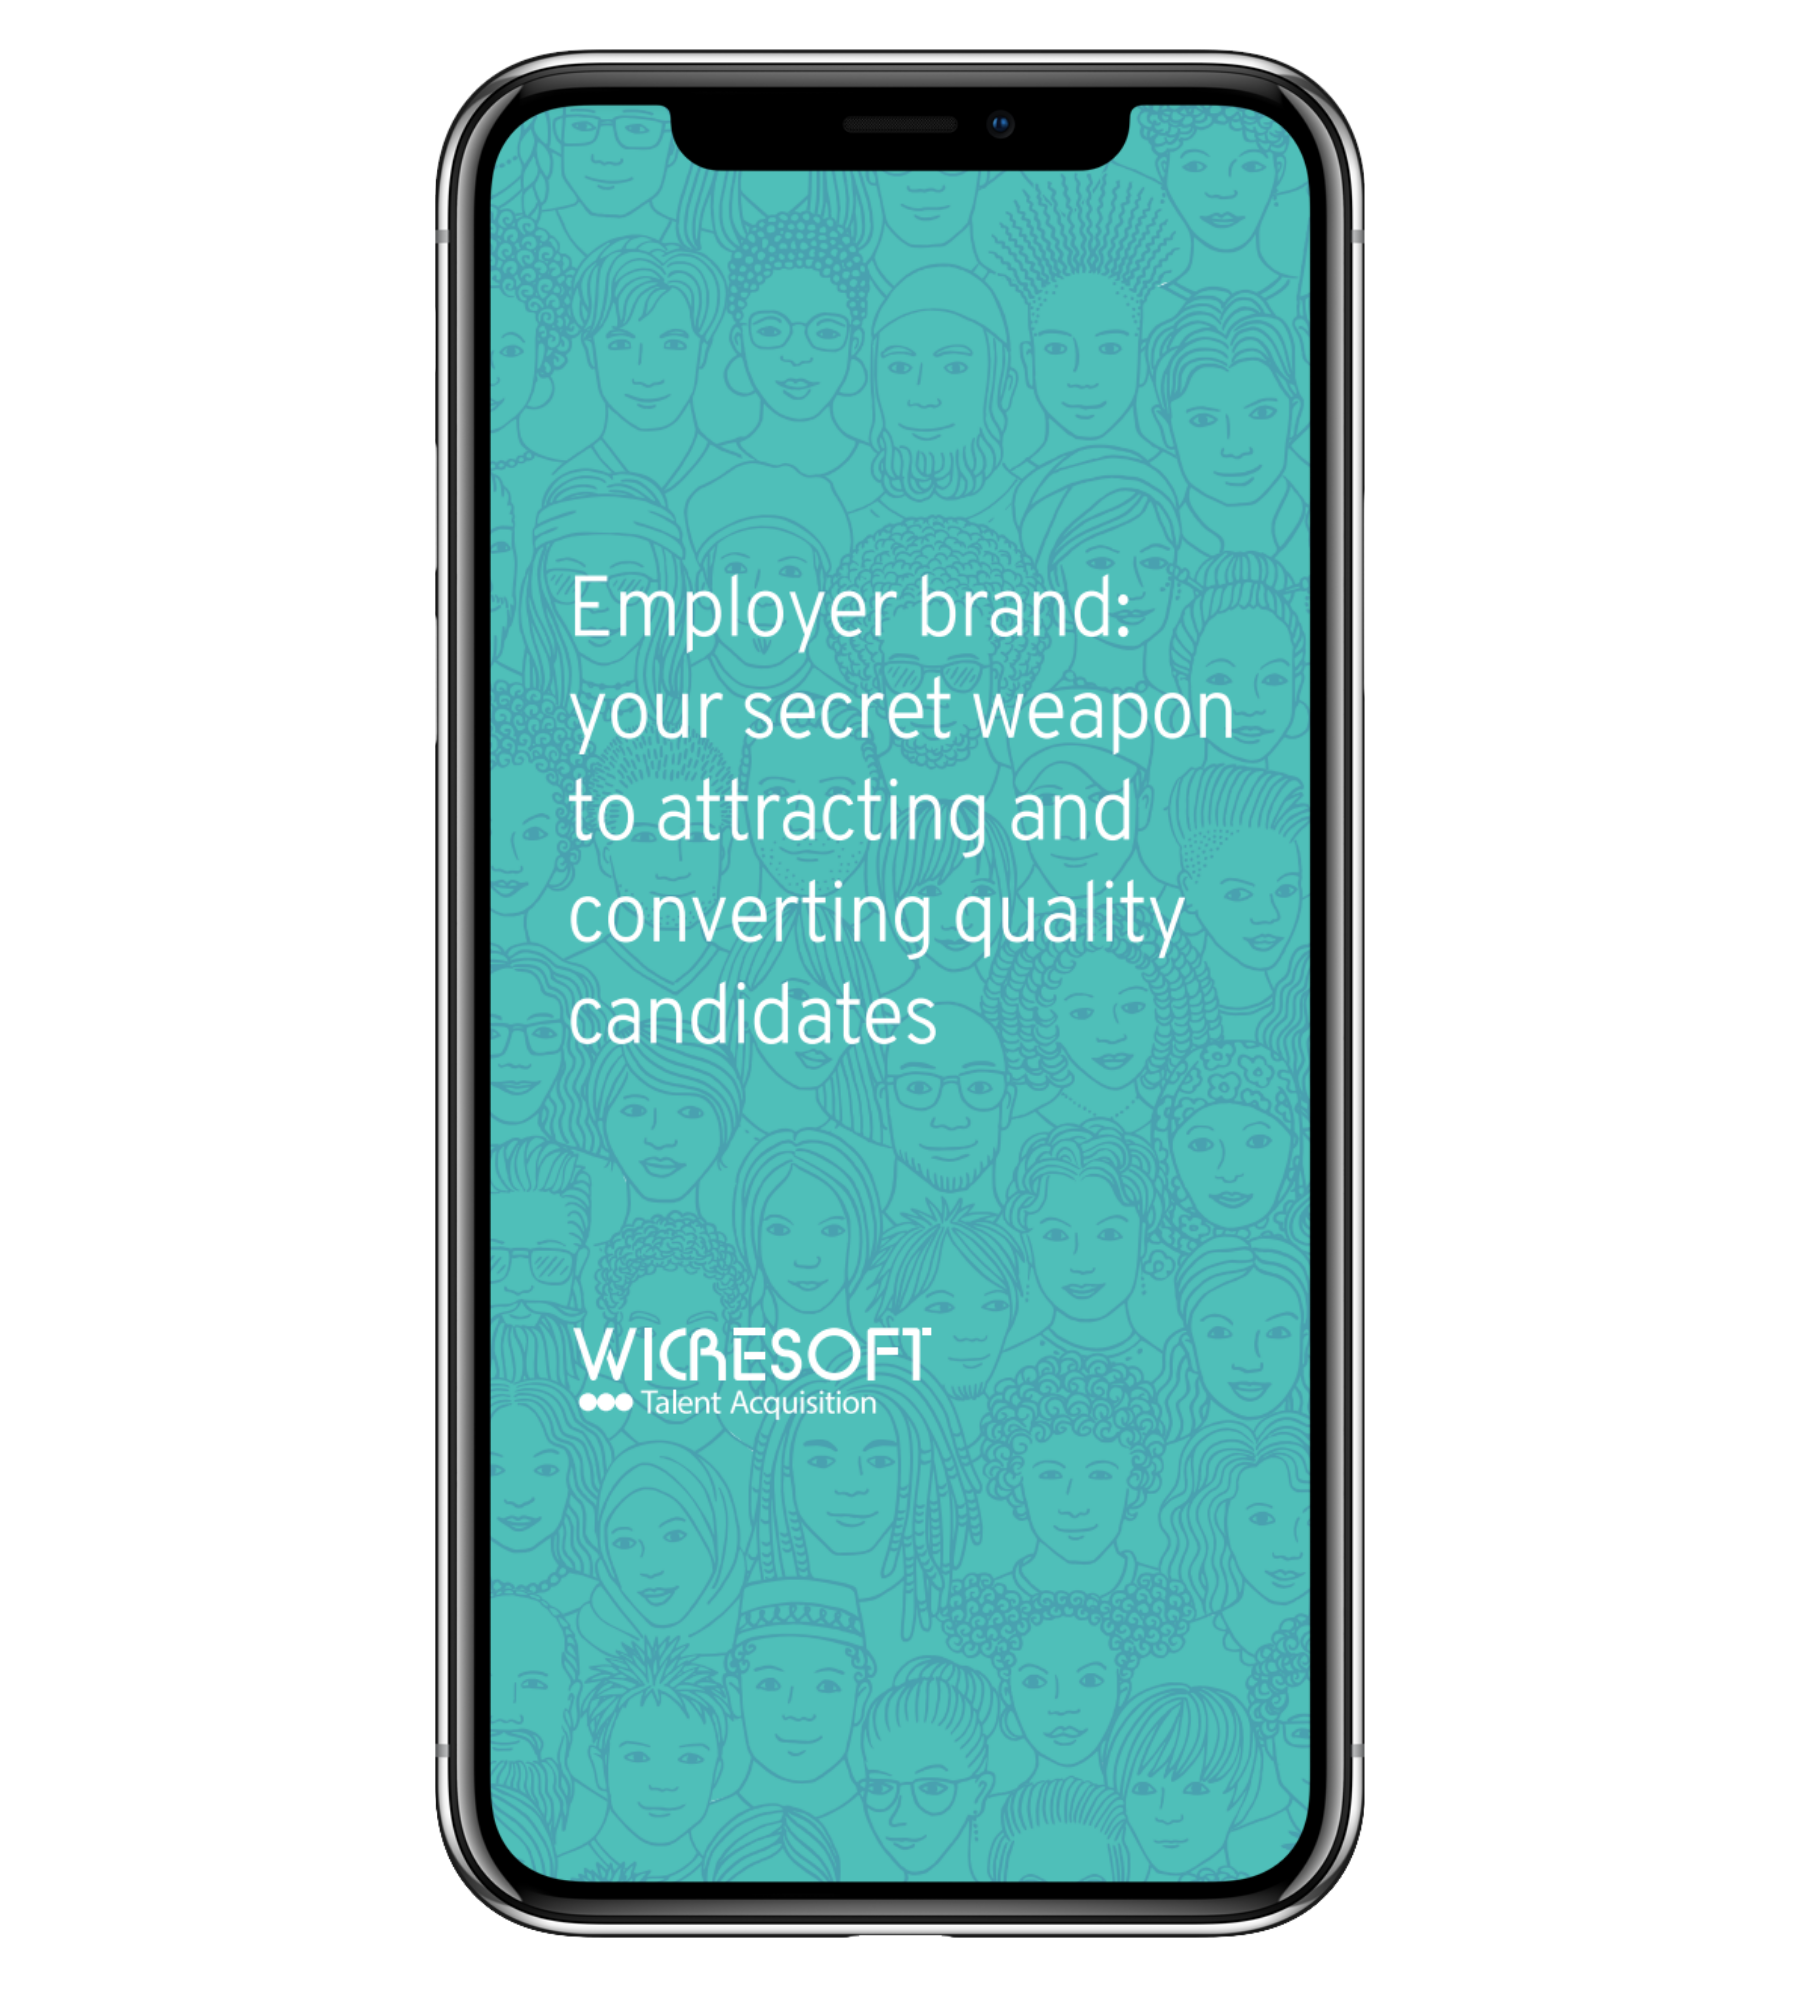 Employer Brand: your secret weapon to attracting and converting quality candidates